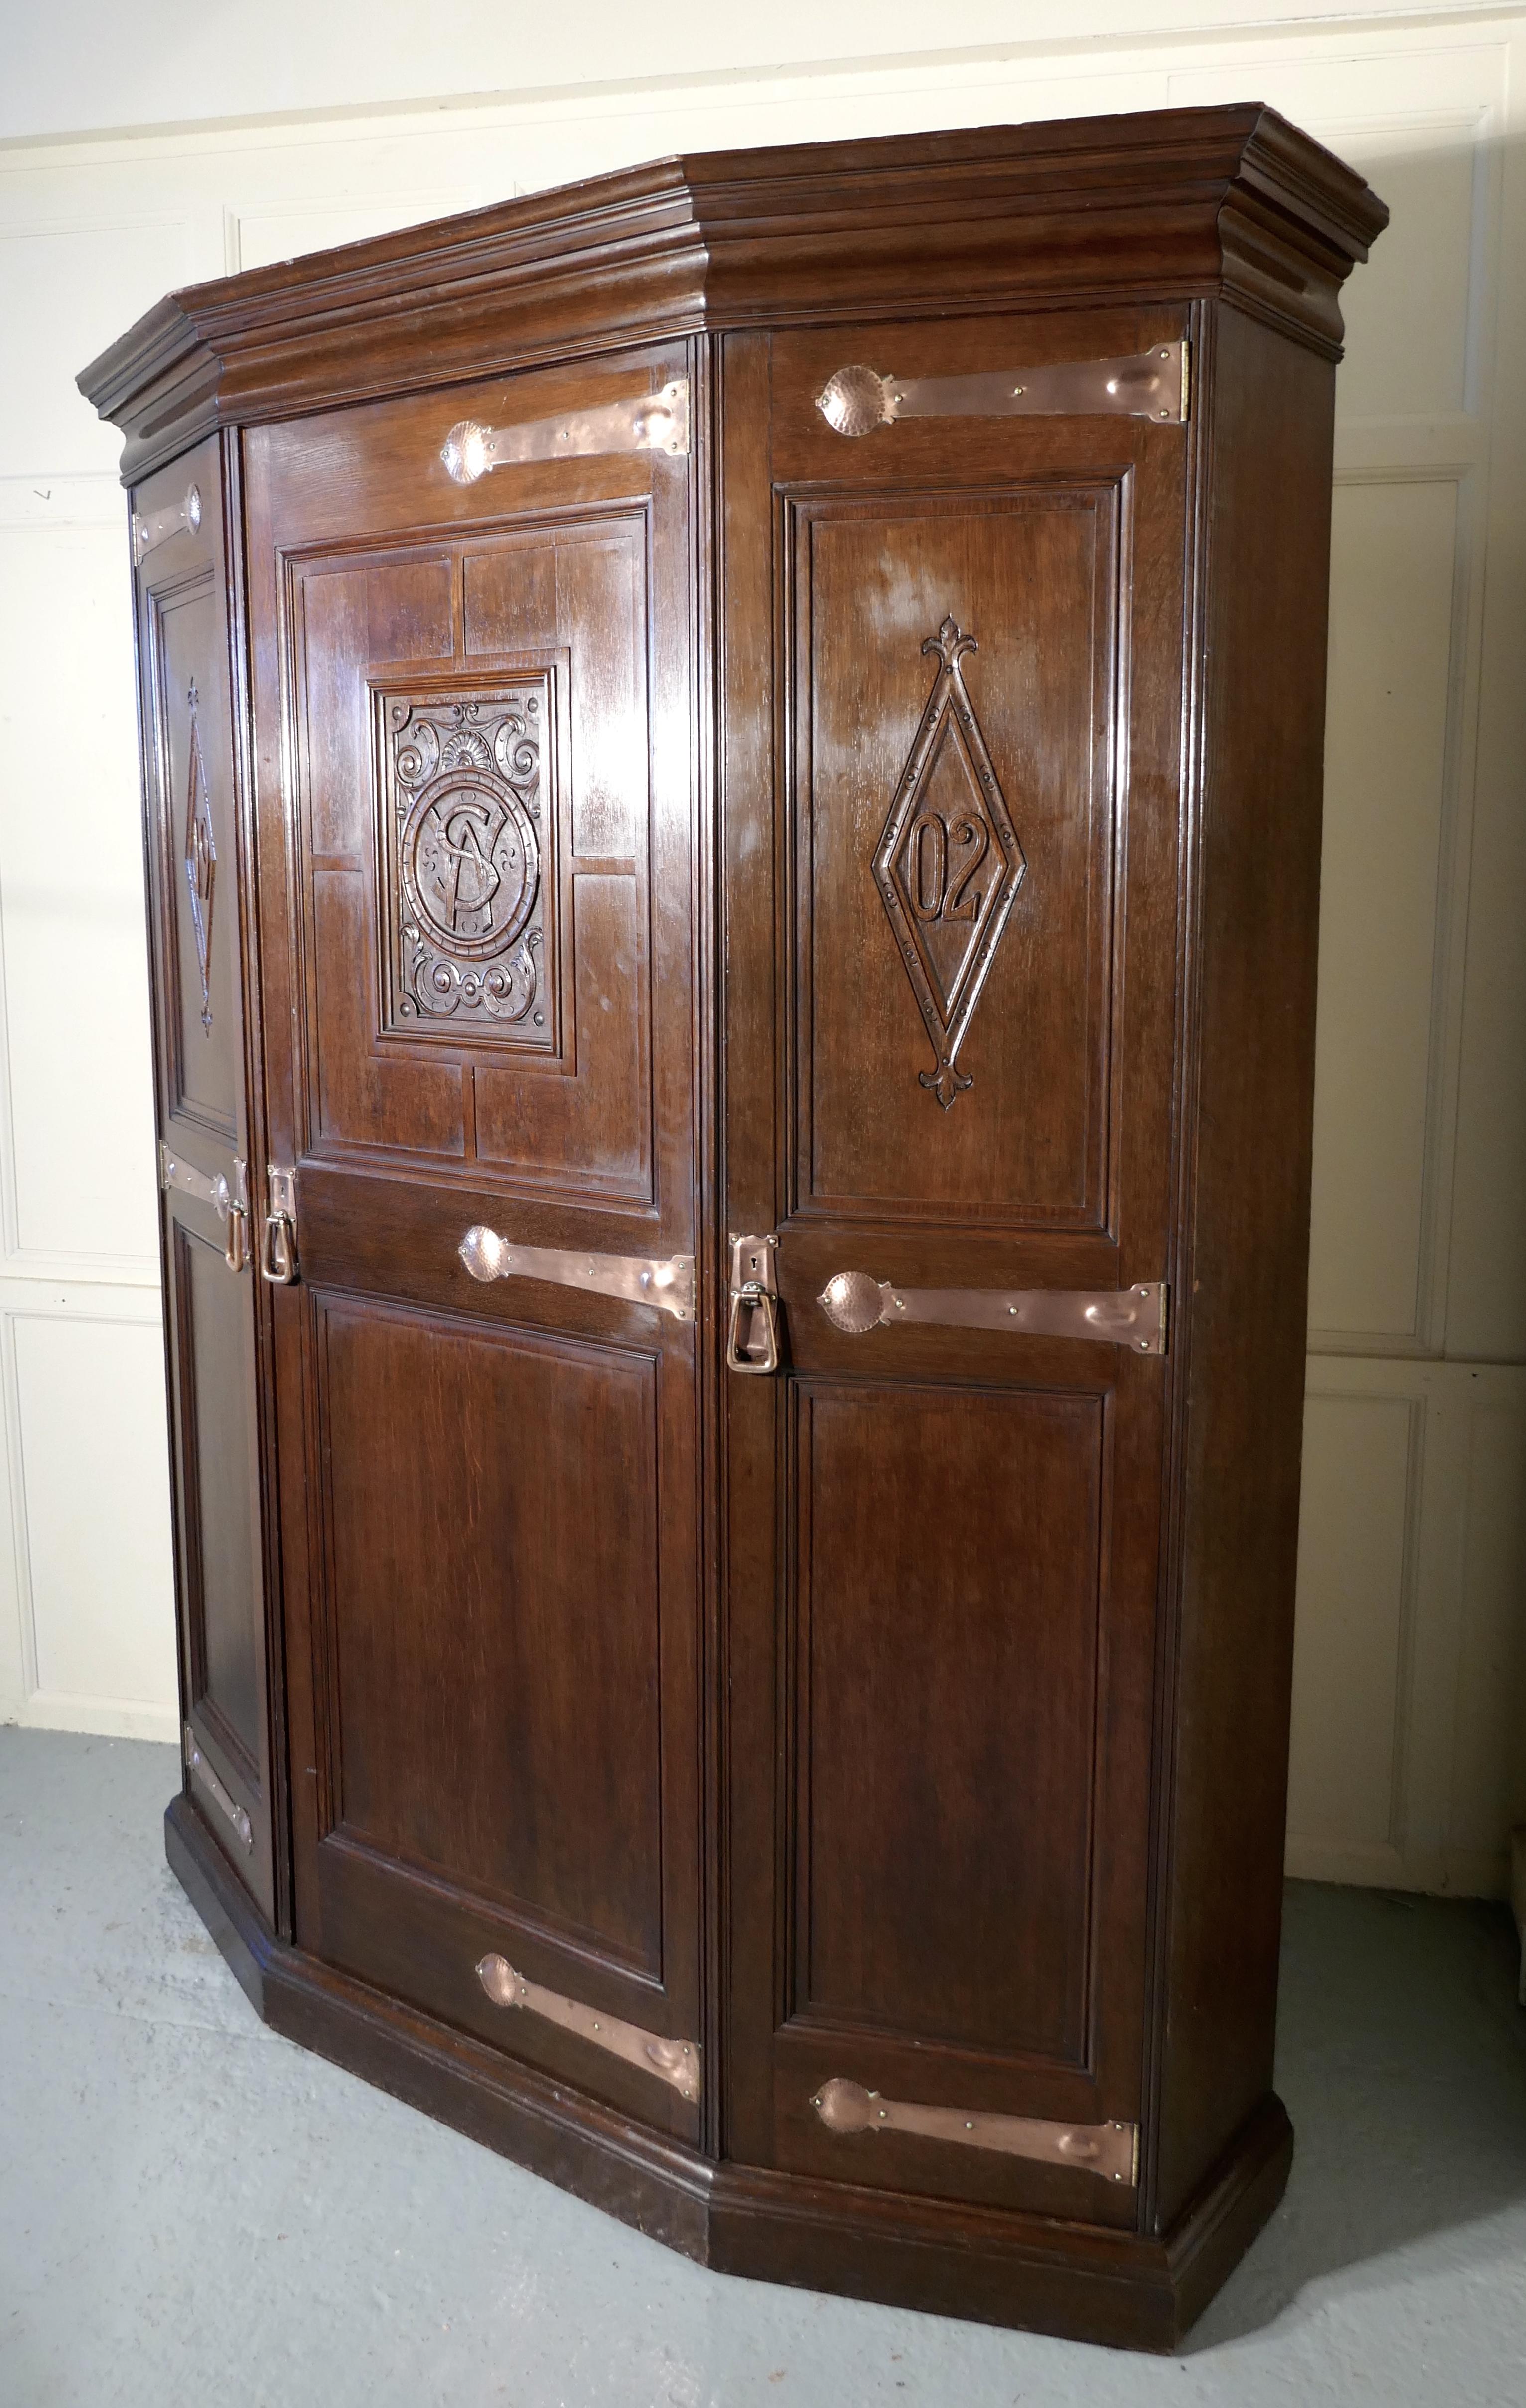 A rare piece of Progressive Arts & Crafts Furniture, made by Gillow for Liberty


This is a specially commissioned Hall wardrobe it has a remarkable and stylish design, typical of the Edwardian era associated with the Arts & Crafts movement.
